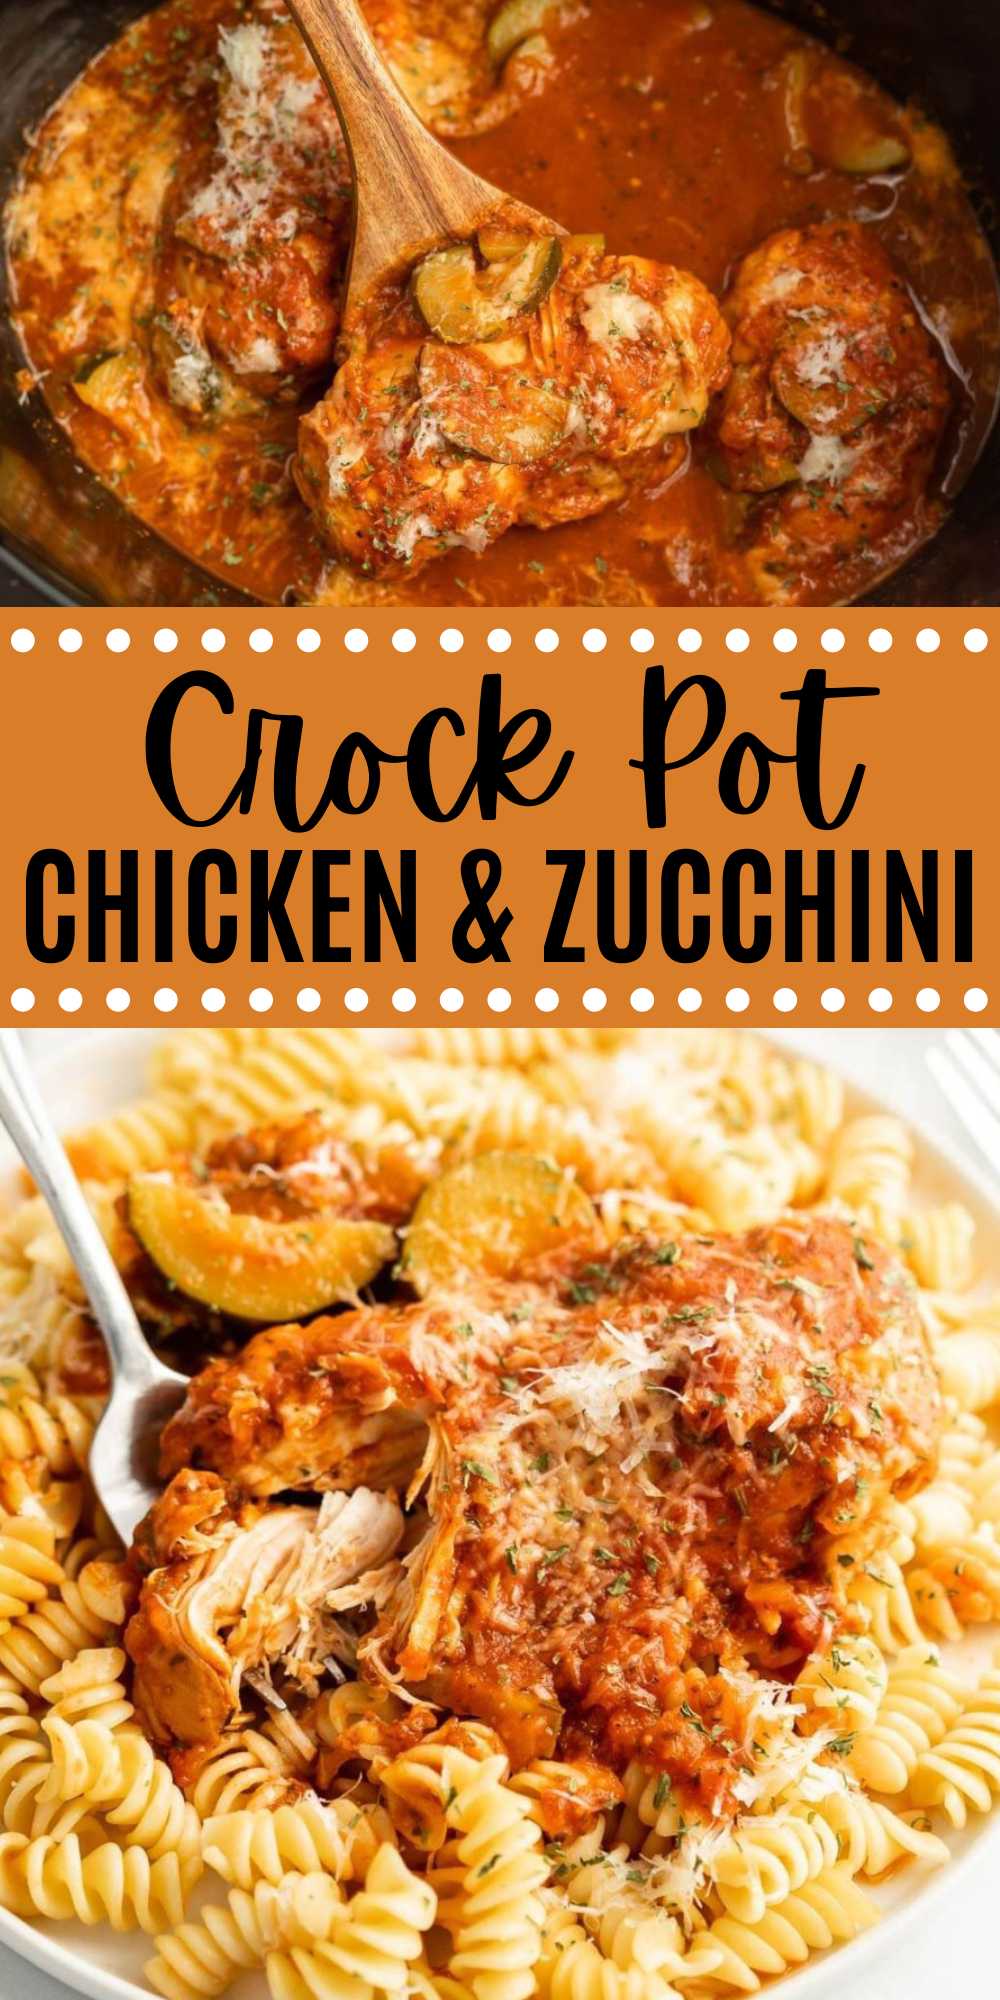 Crock Pot Chicken and Zucchini Recipe - Healthy and Quick